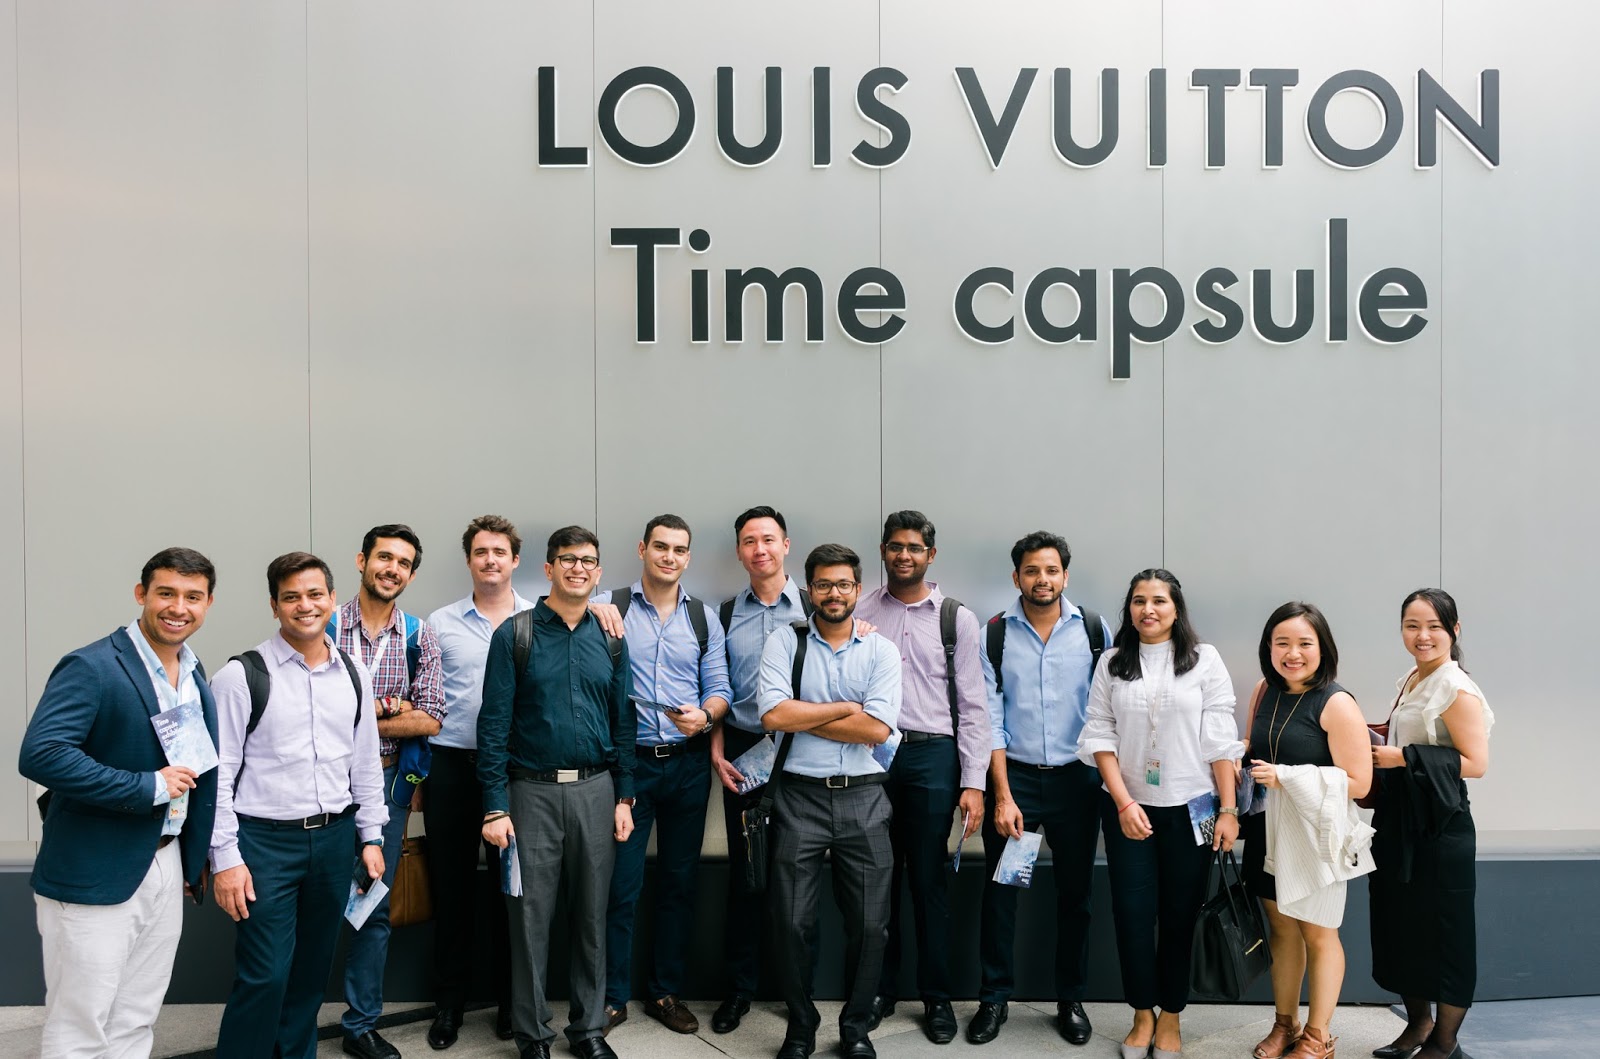 ESSEC Global MBA  ESSEC Business School: A Visit to Louis Vuitton's Time  Capsule Exhibition in Singapore